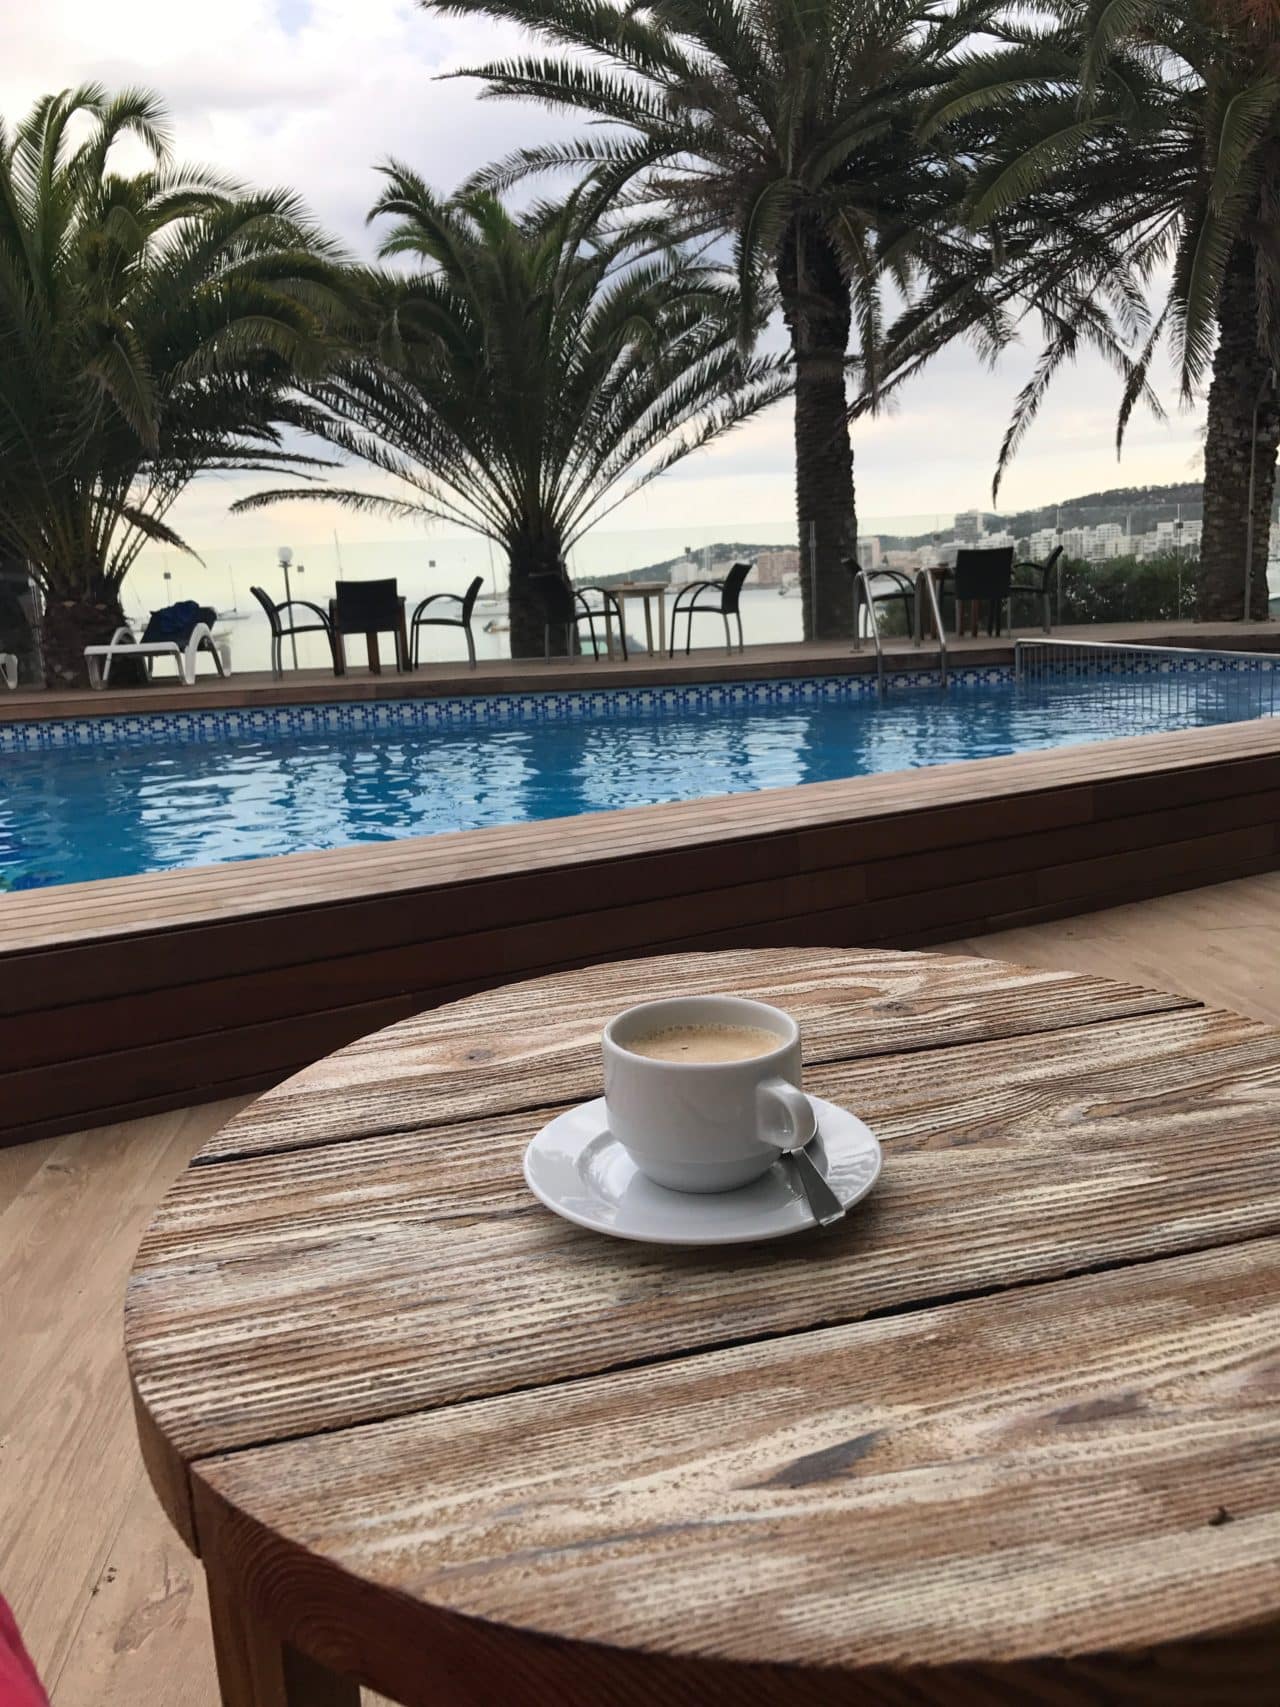 Coffee In A White Coffee Cup On A Wooden Table In A Hotel In Spain Overlooking Pool And Sea